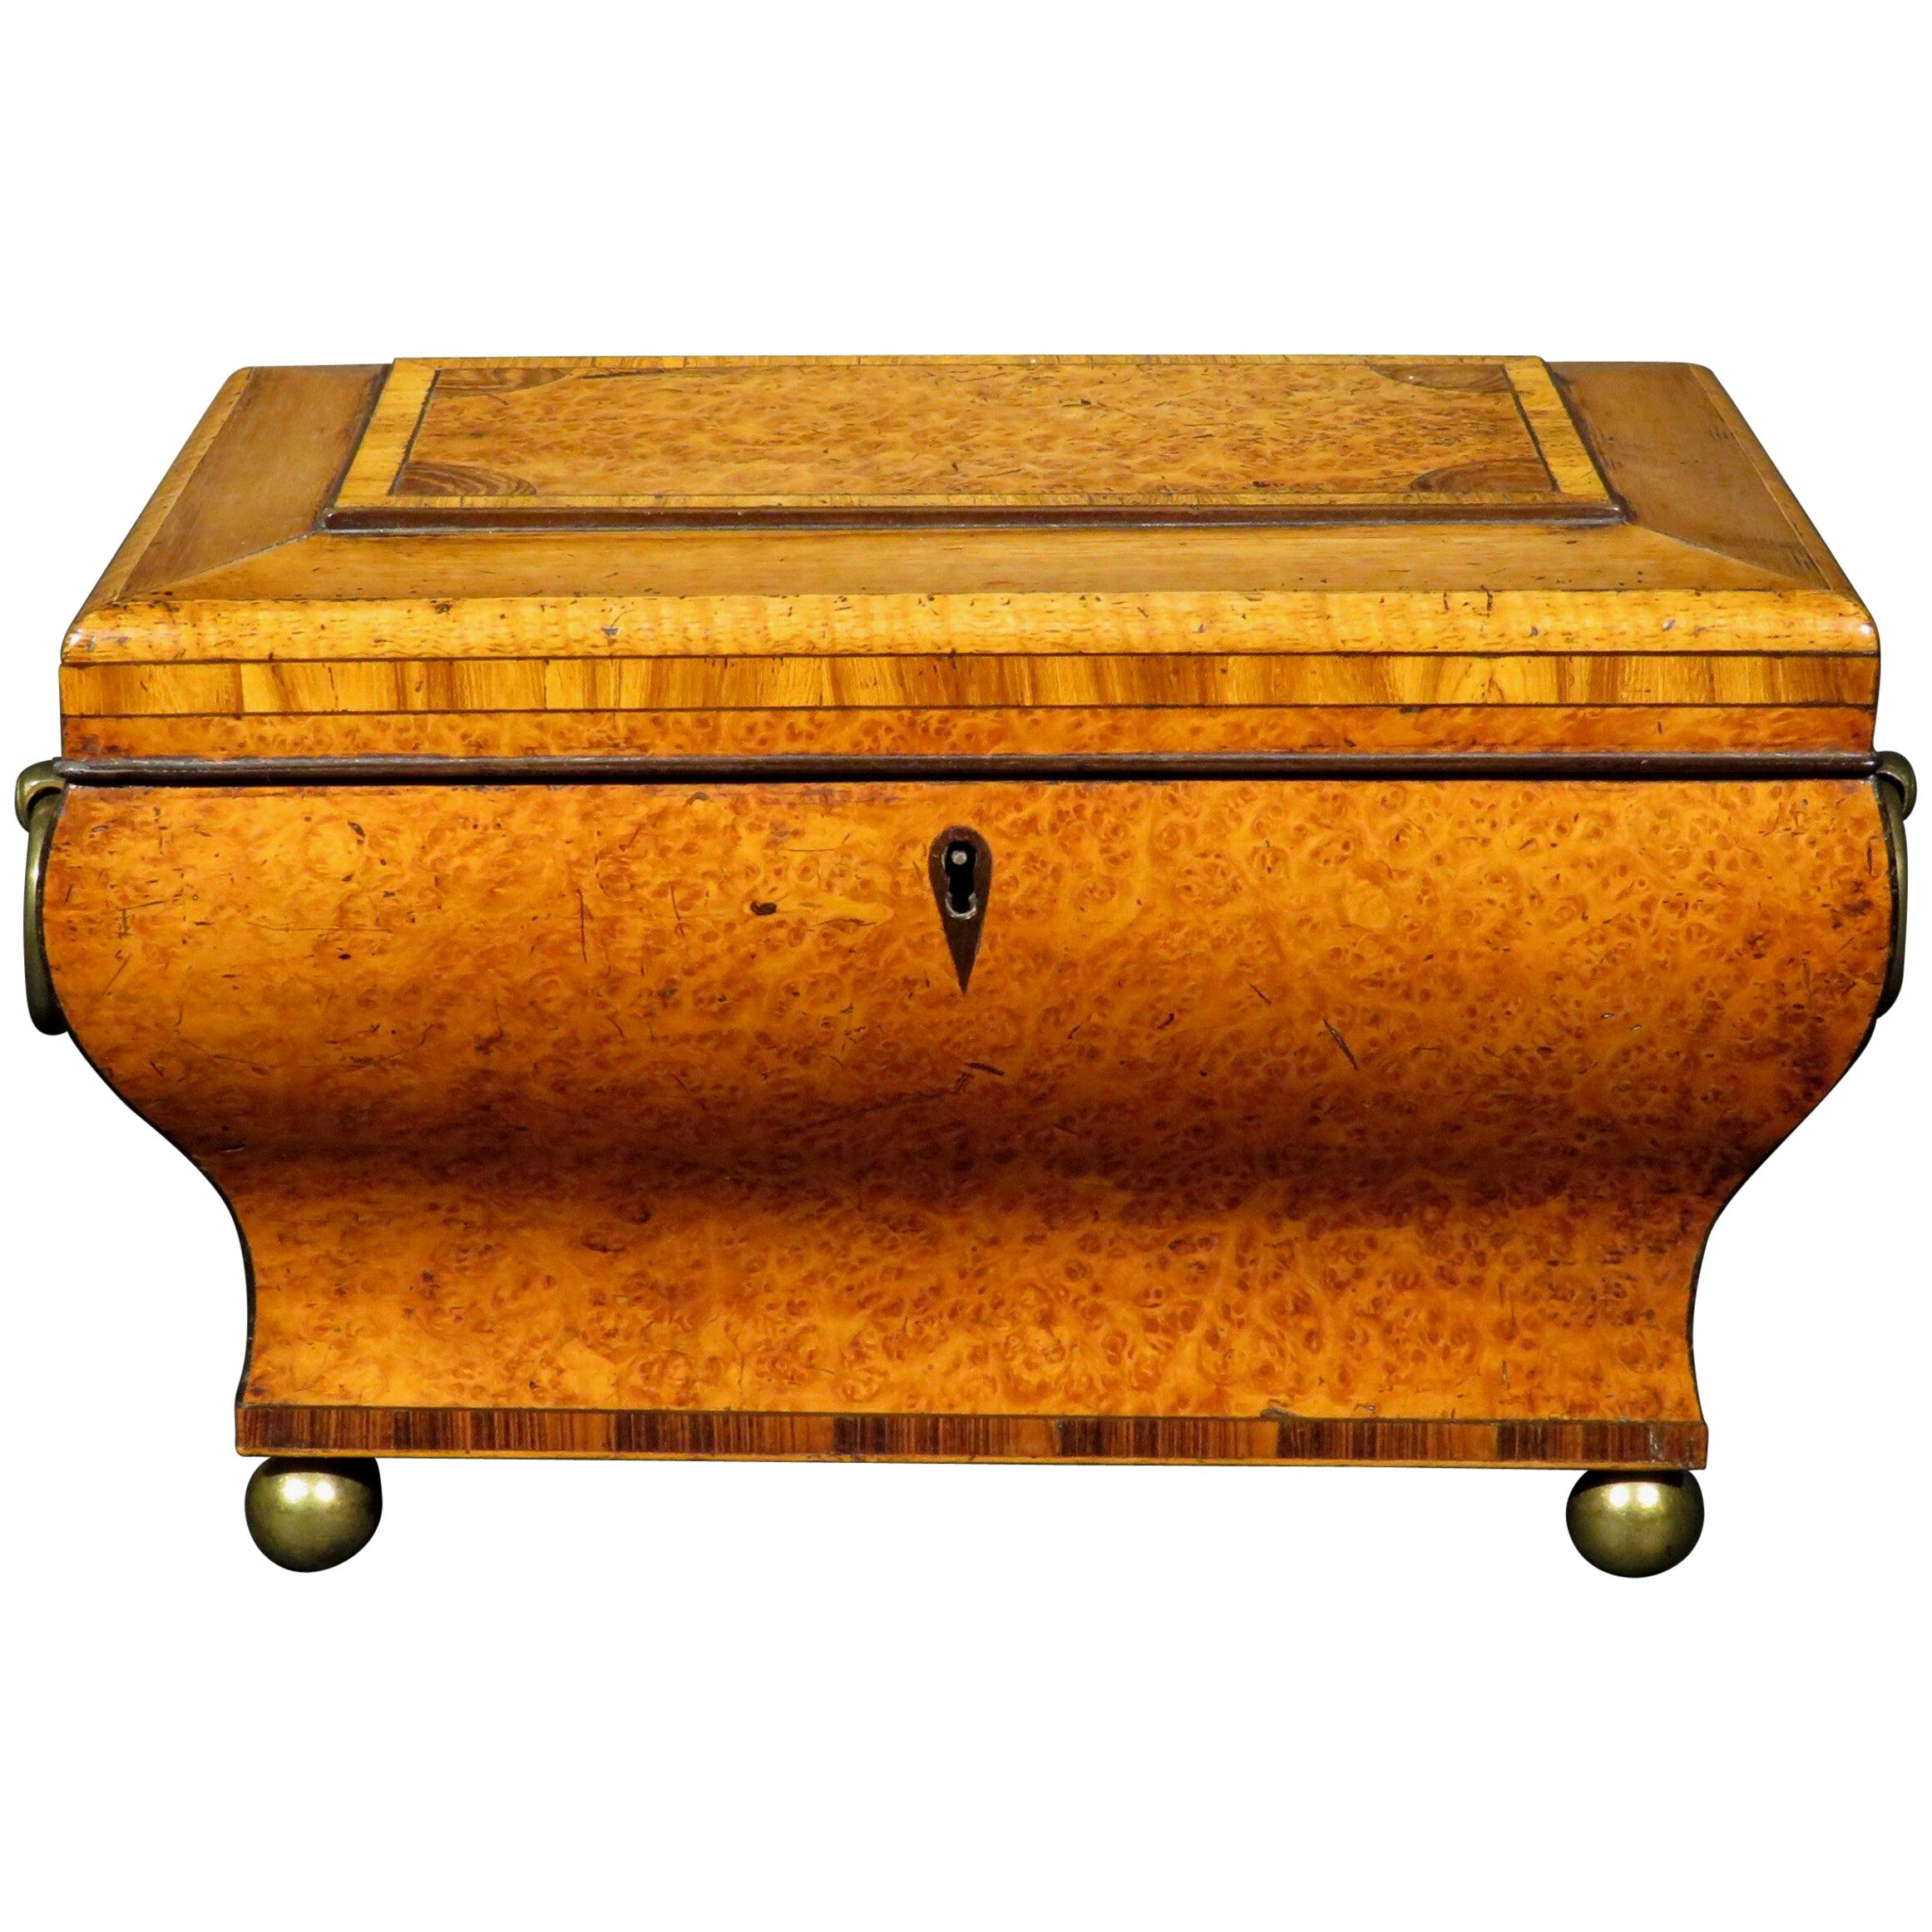 A very fine and visually striking Biedermeier Period tea caddy of exceptional quality, demonstrating a highly elevated form and a most complex application of exotic woods. The hinged lid showing a raised central lozenge in burr yew wood, inset with